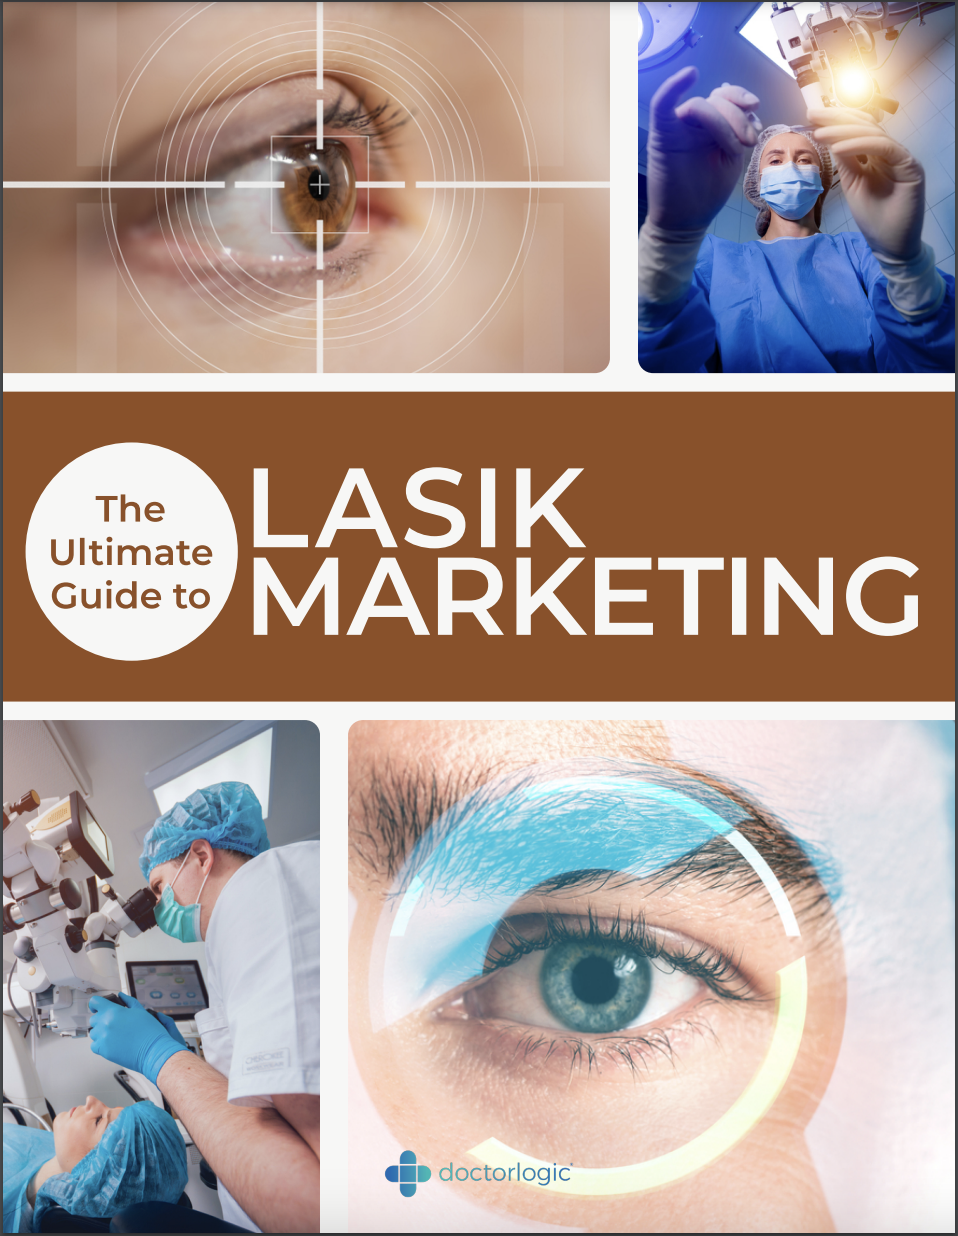 The Ultimate Guide to LASIK Marketing